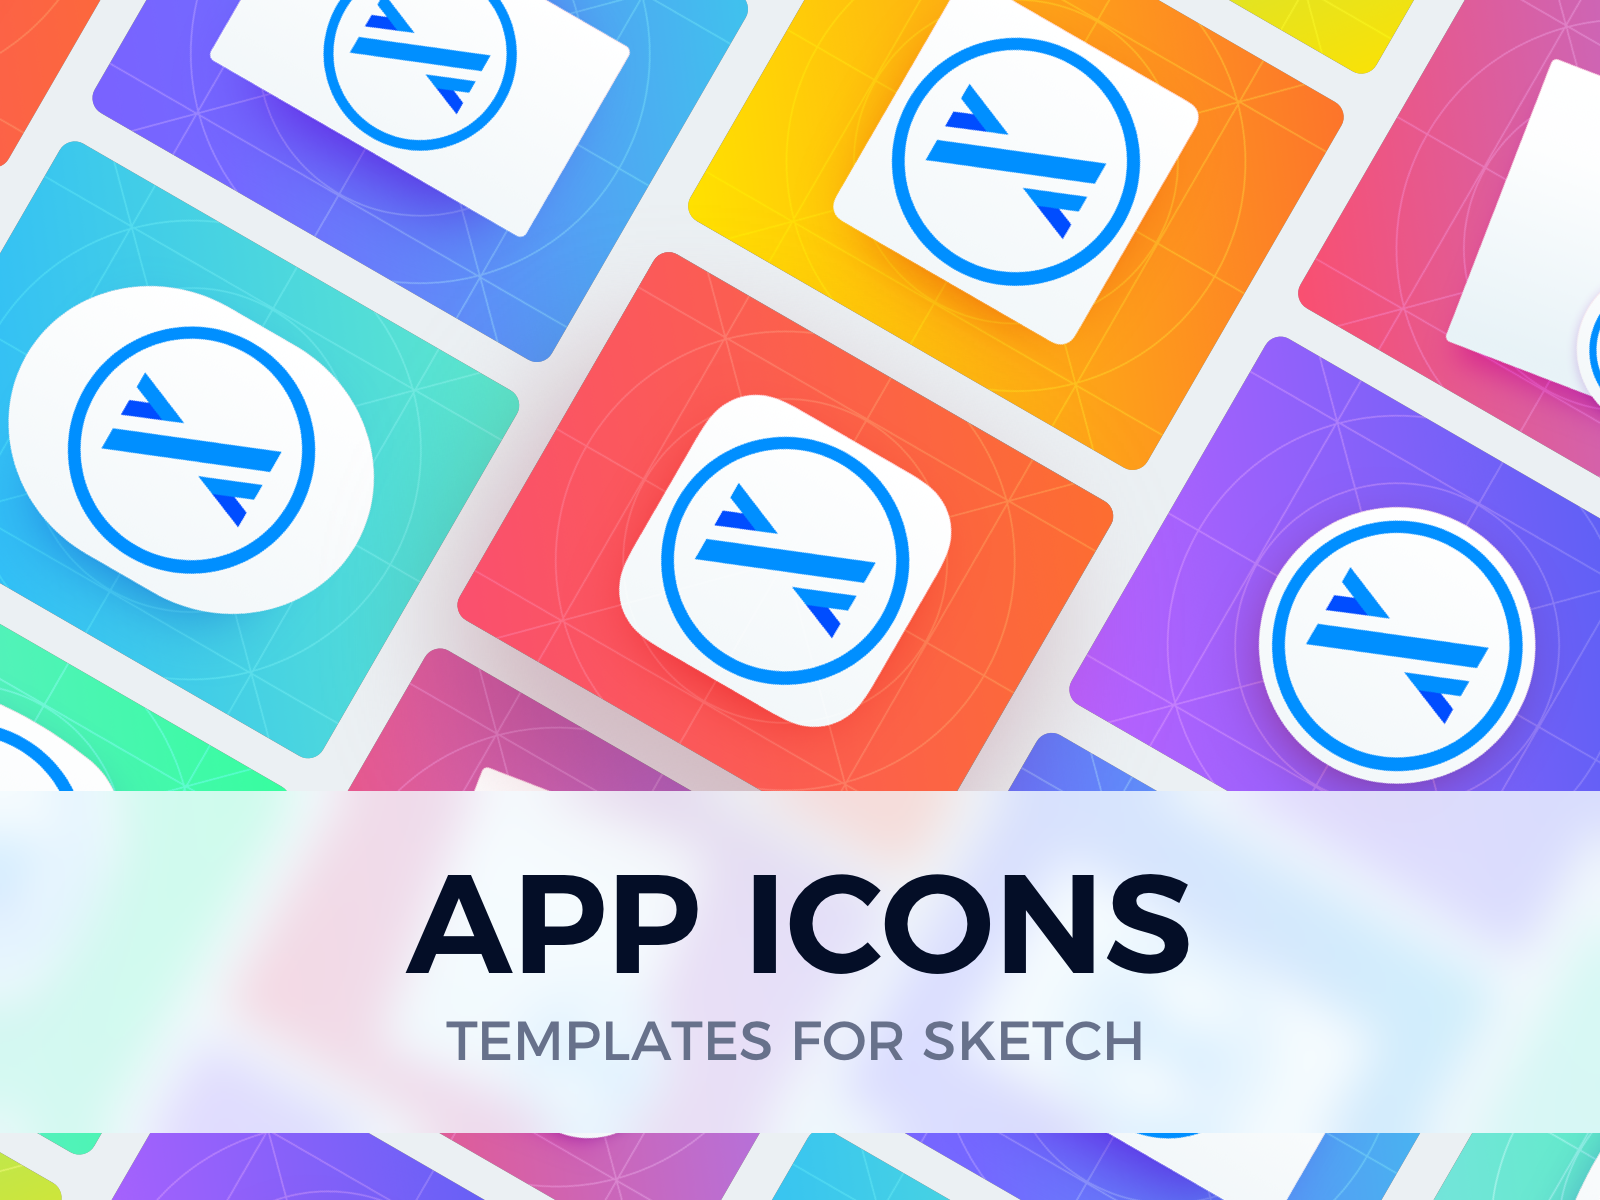 App Icons - Templates for Sketch